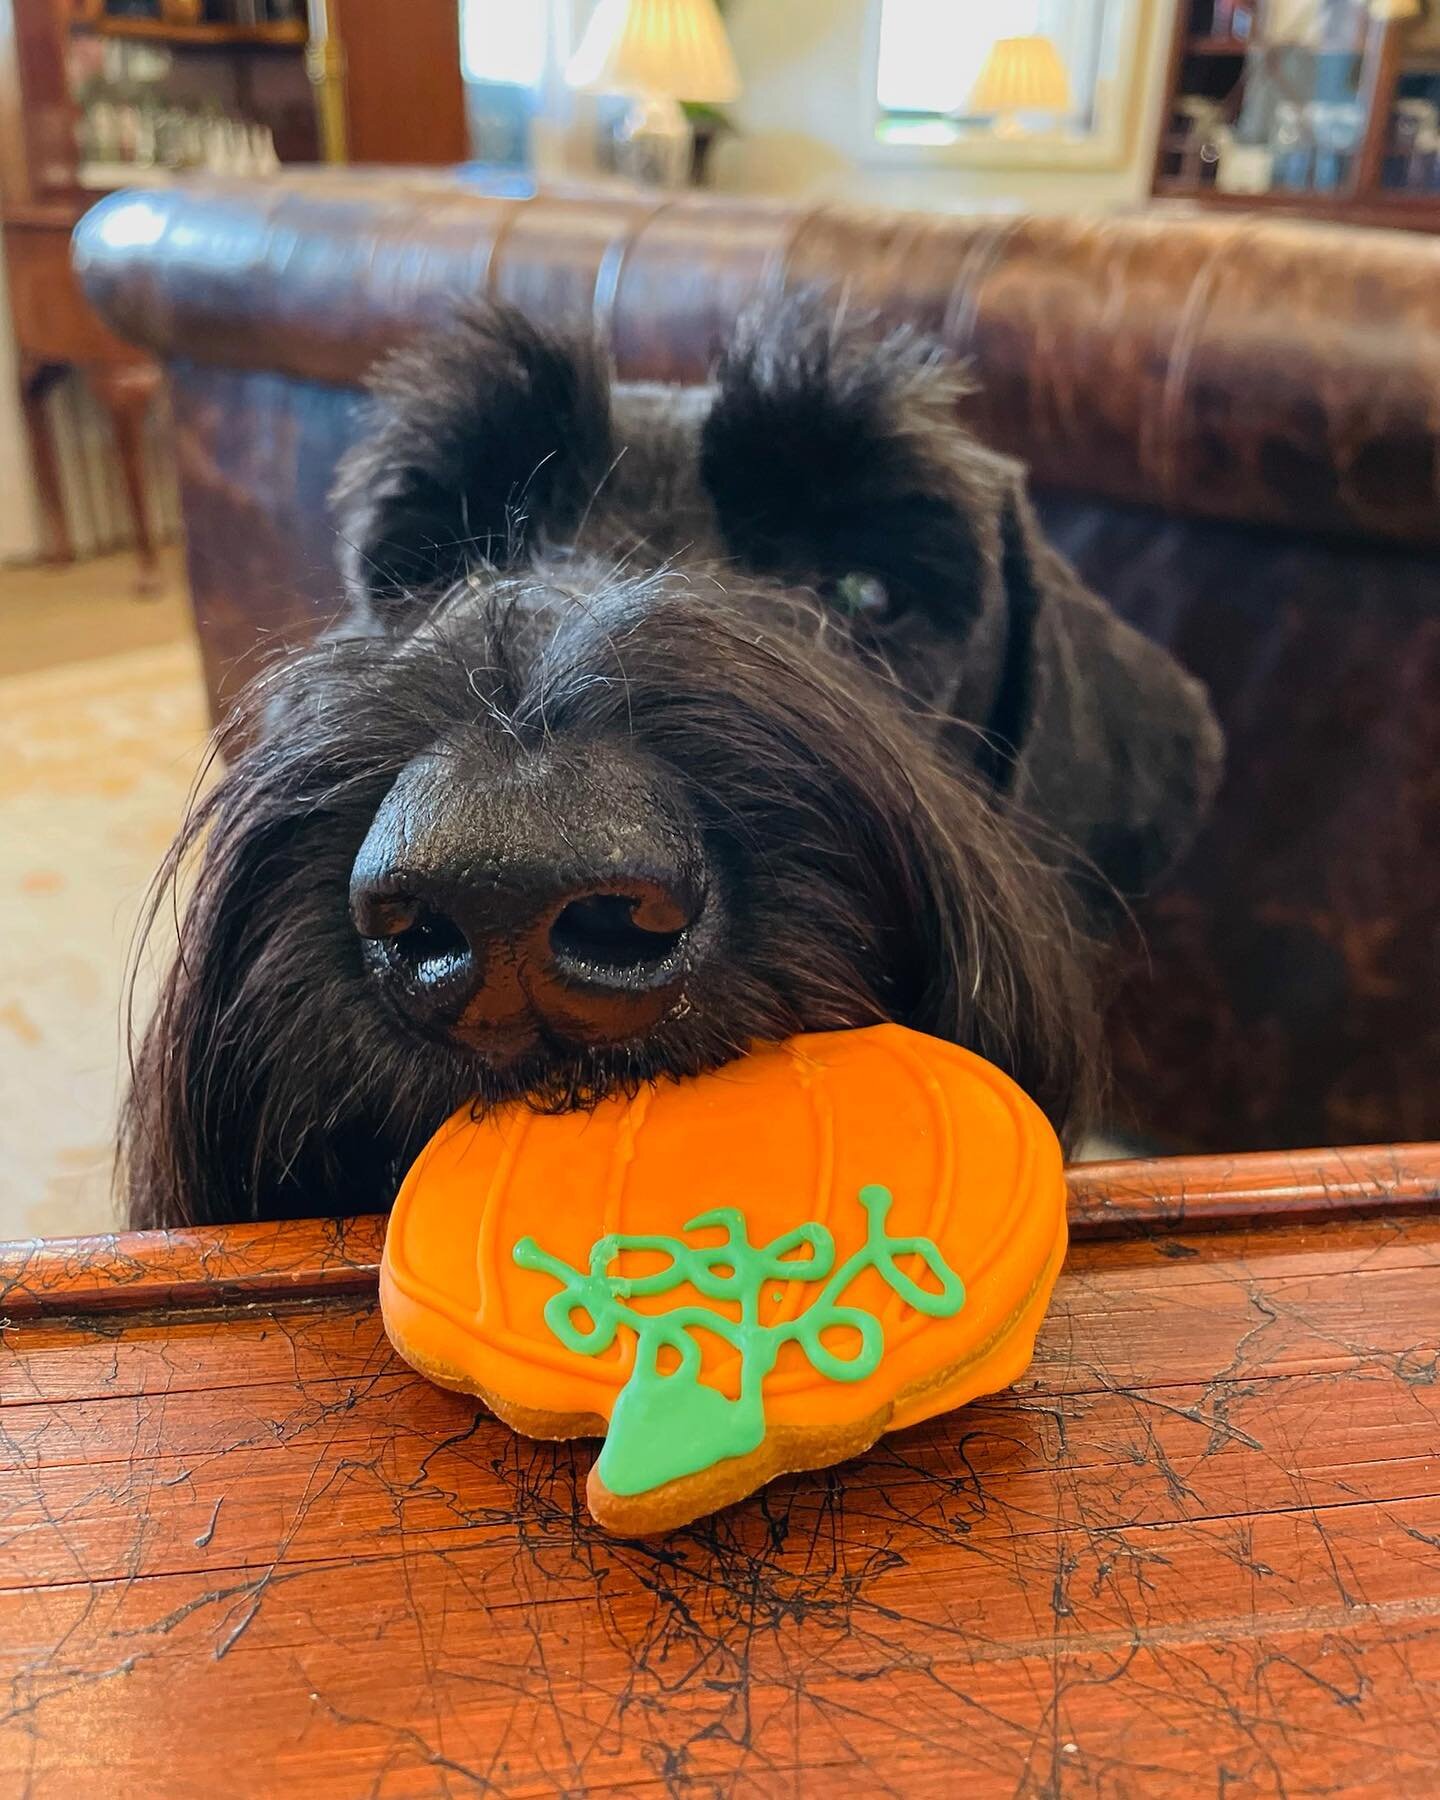 Hi! Jackson here, just wanted to remind everyone it&rsquo;s Halloween tomorrow and I&rsquo;ll be accepting all the 🎃 treats &hellip; thanks in advance 🫶🏻